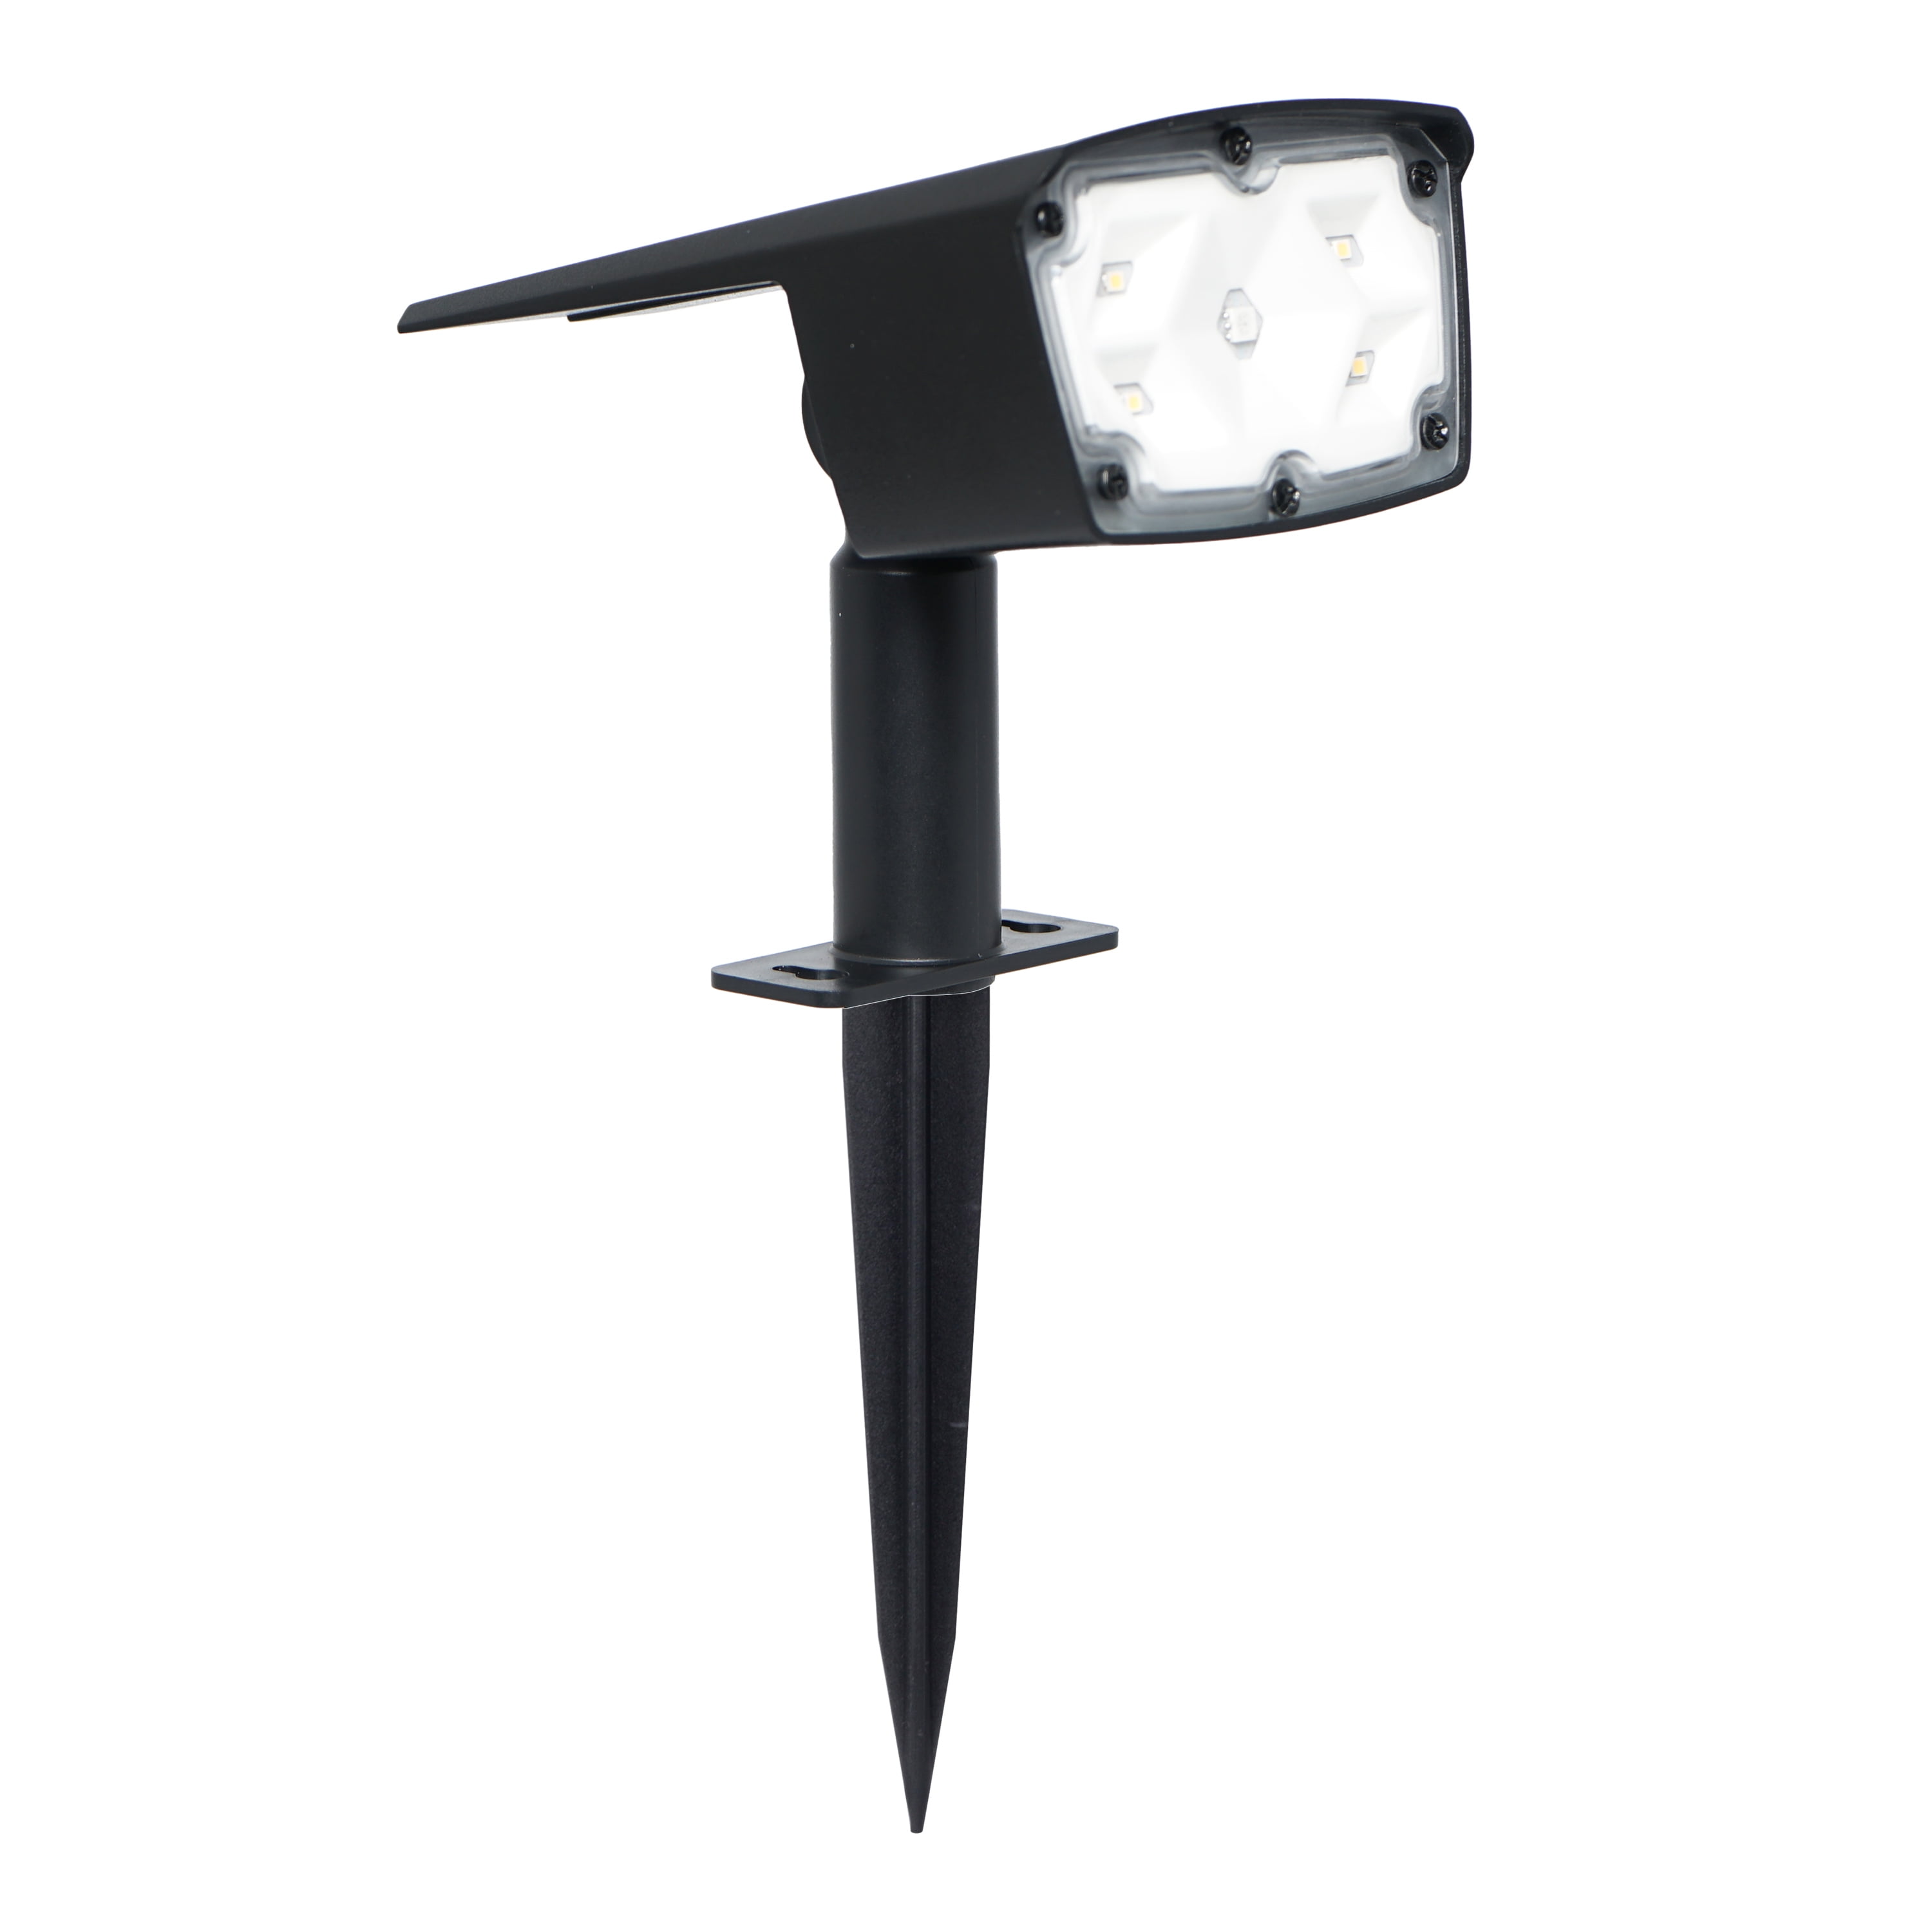 Mainstays 100 Lumen Solar Powered Color Change LED Spotlight with Mount or Ground Stake Option Durable Plastic Construction